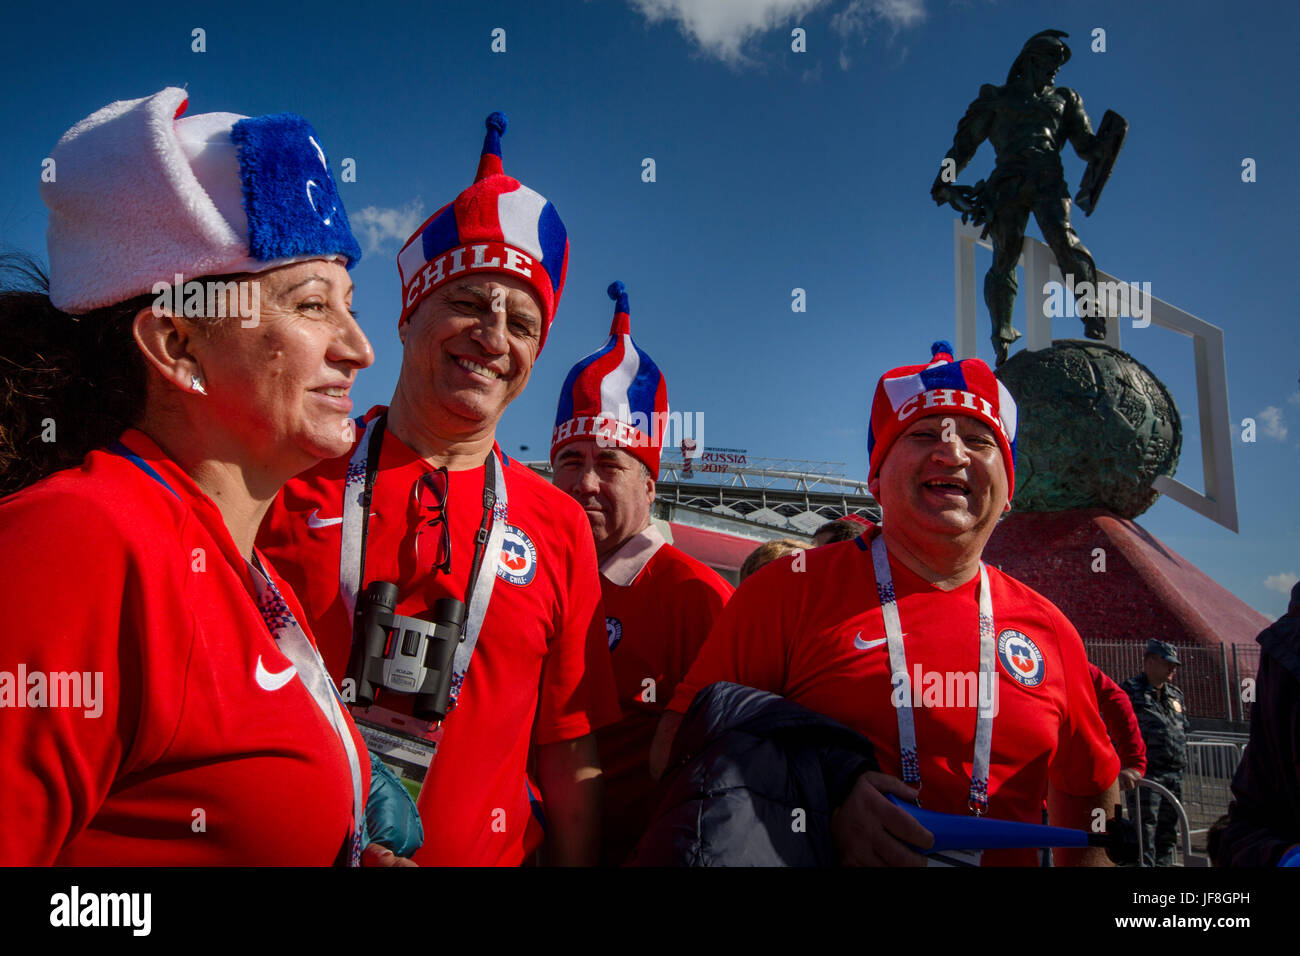 Fans of Chile's national team between before start the match Chile and Australia on the 2017 FIFA Confederations Cup near Otkritie Arena stadium Stock Photo